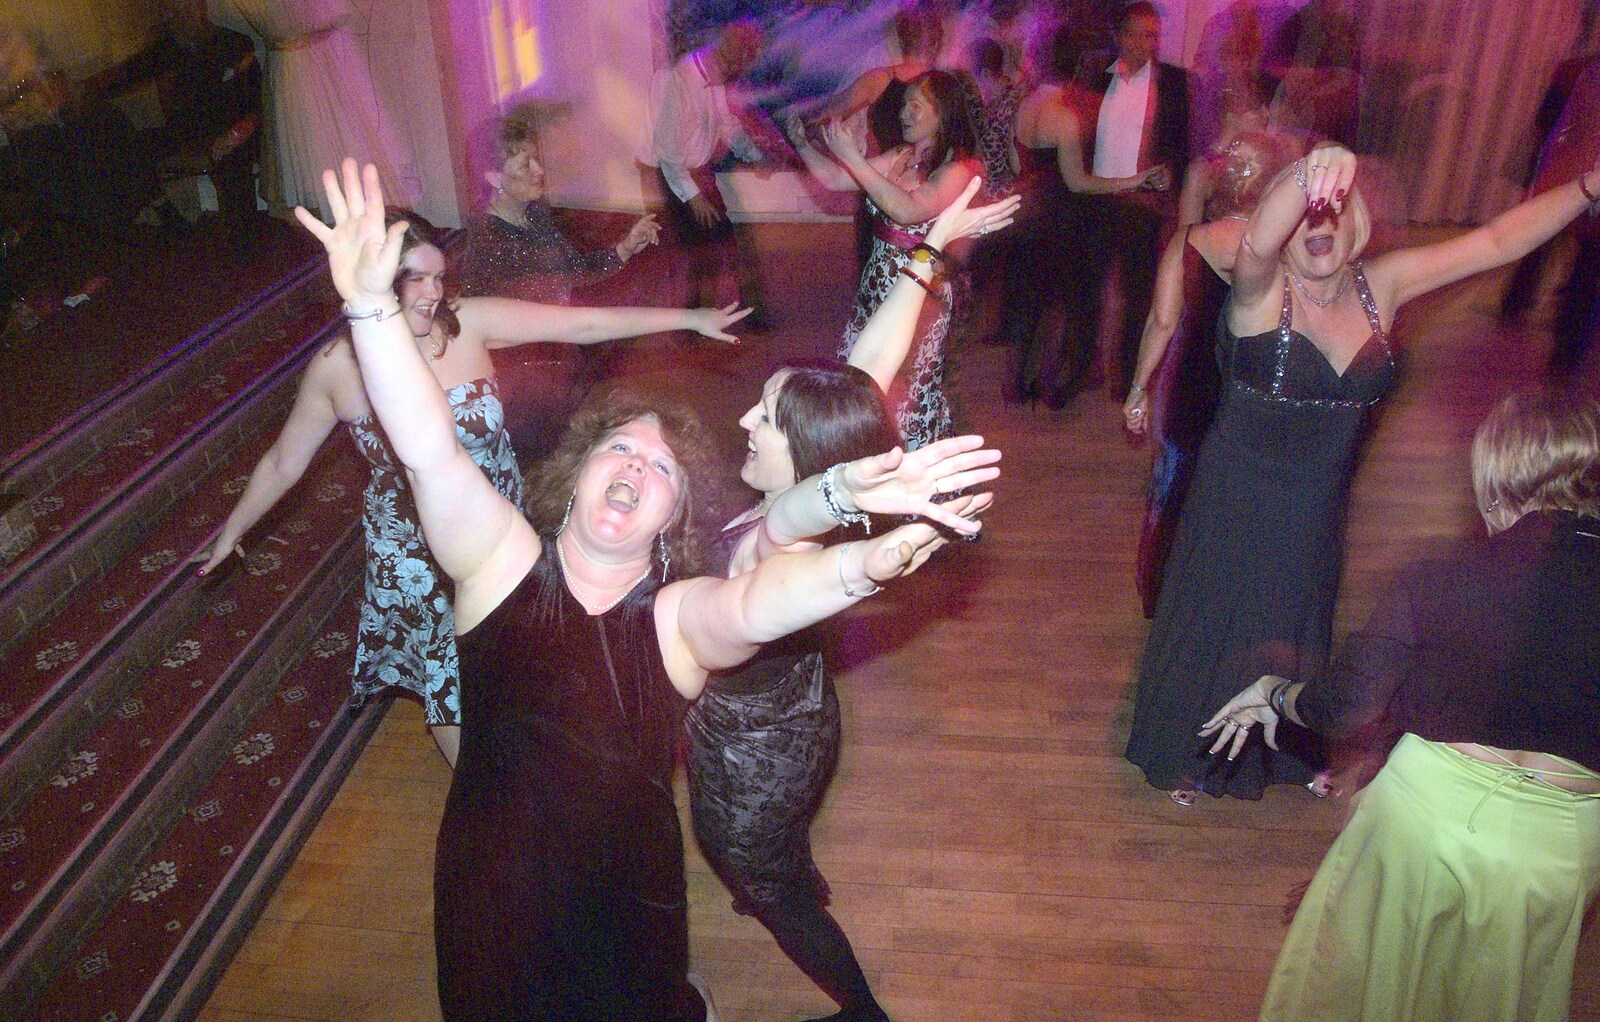 Jo dances after the gig from New Year's Eve With The BBs, Park Hotel, Diss, Norfolk - 31st December 2010